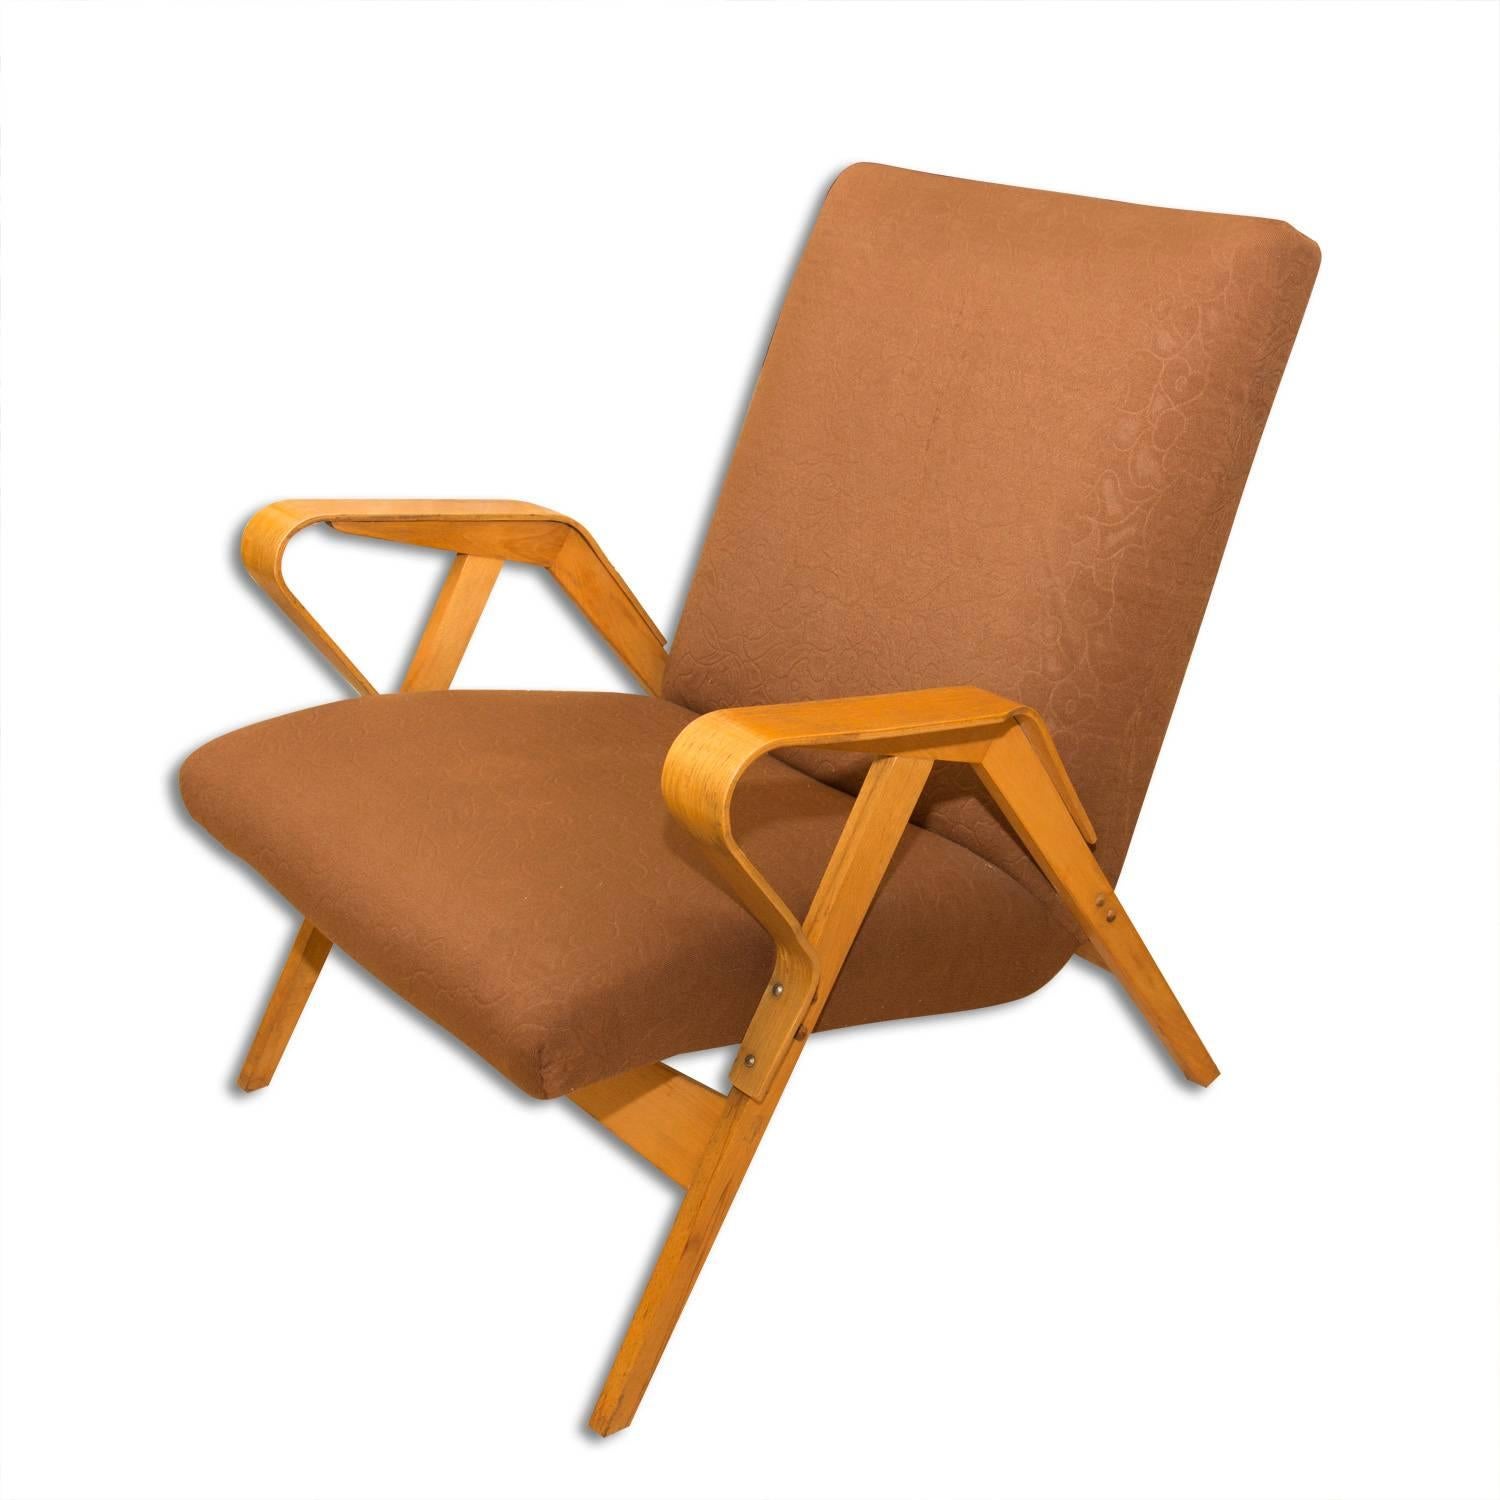 A pair of Czechoslovak bentwood lounge armchairs produced by Tatra Nabytok, Czechoslovakia in the 1960s. The design of these chairs followed the huge success of the Czechoslovak pavilion at the Brussels Expo 58.
They were restored in the past with